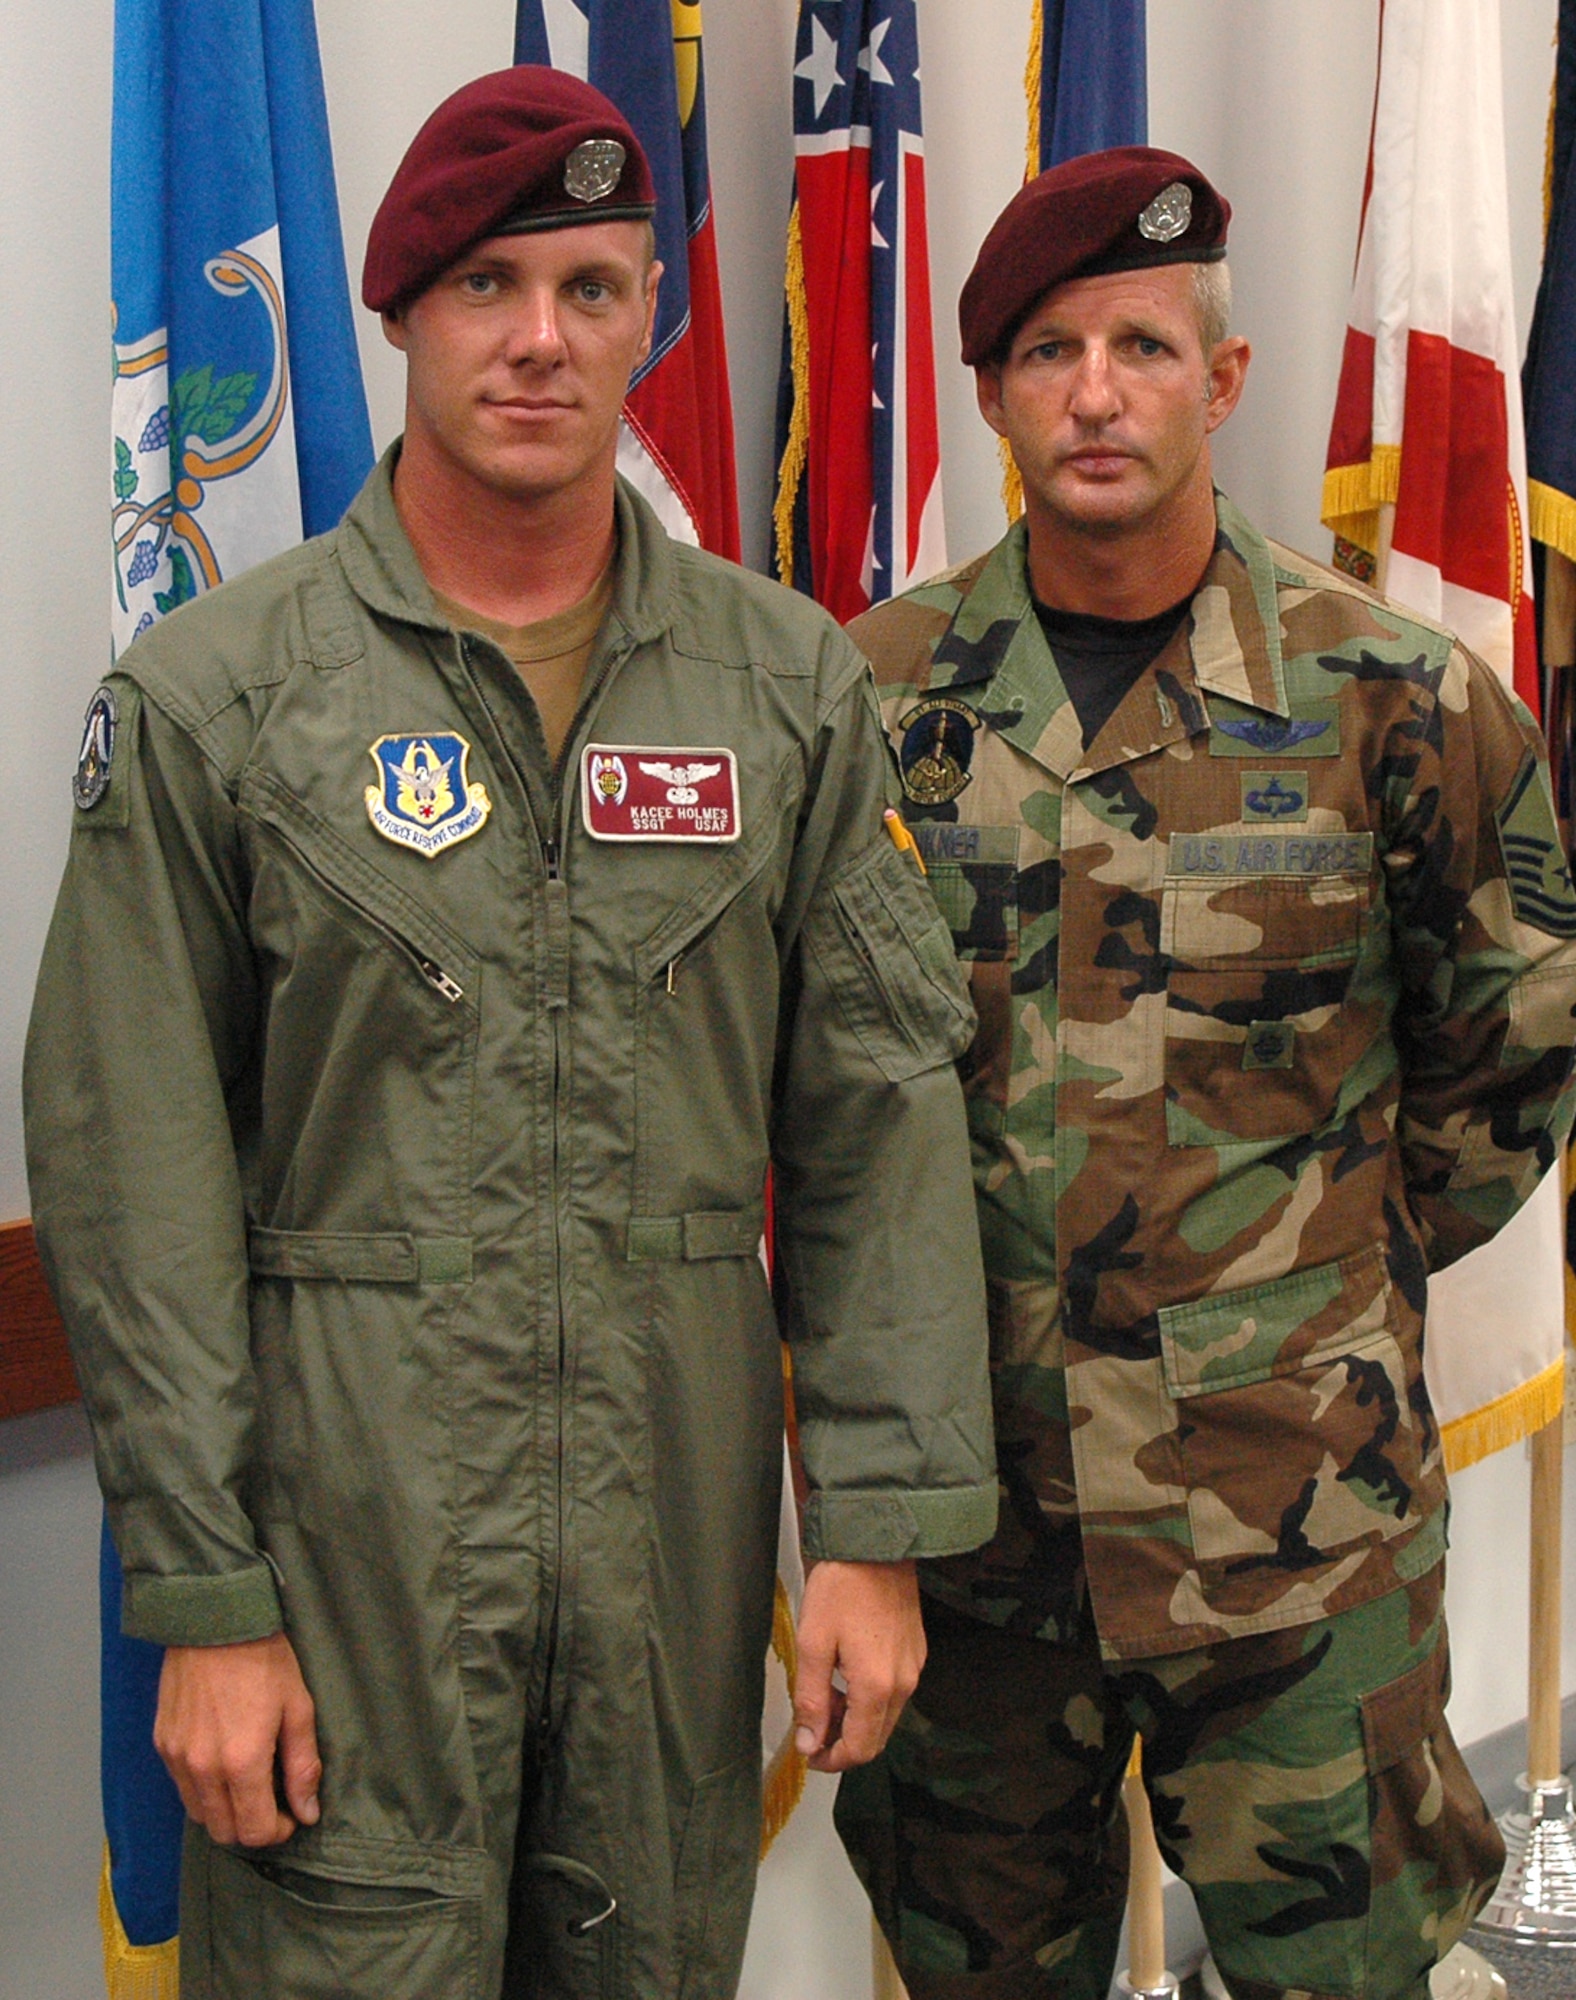 Staff Sgt. Kacee Holmes (left) and Master Sgt. Chris Seinkner, Air Force Reserve pararescuemen with the 920th Rescue Wing, Patrick Air Force Base, Fla., were preparing for a training mission when they got called out on a real life-saving mission that resulted in rescuing a 66-year-old man from the Atlantic Ocean June 28.